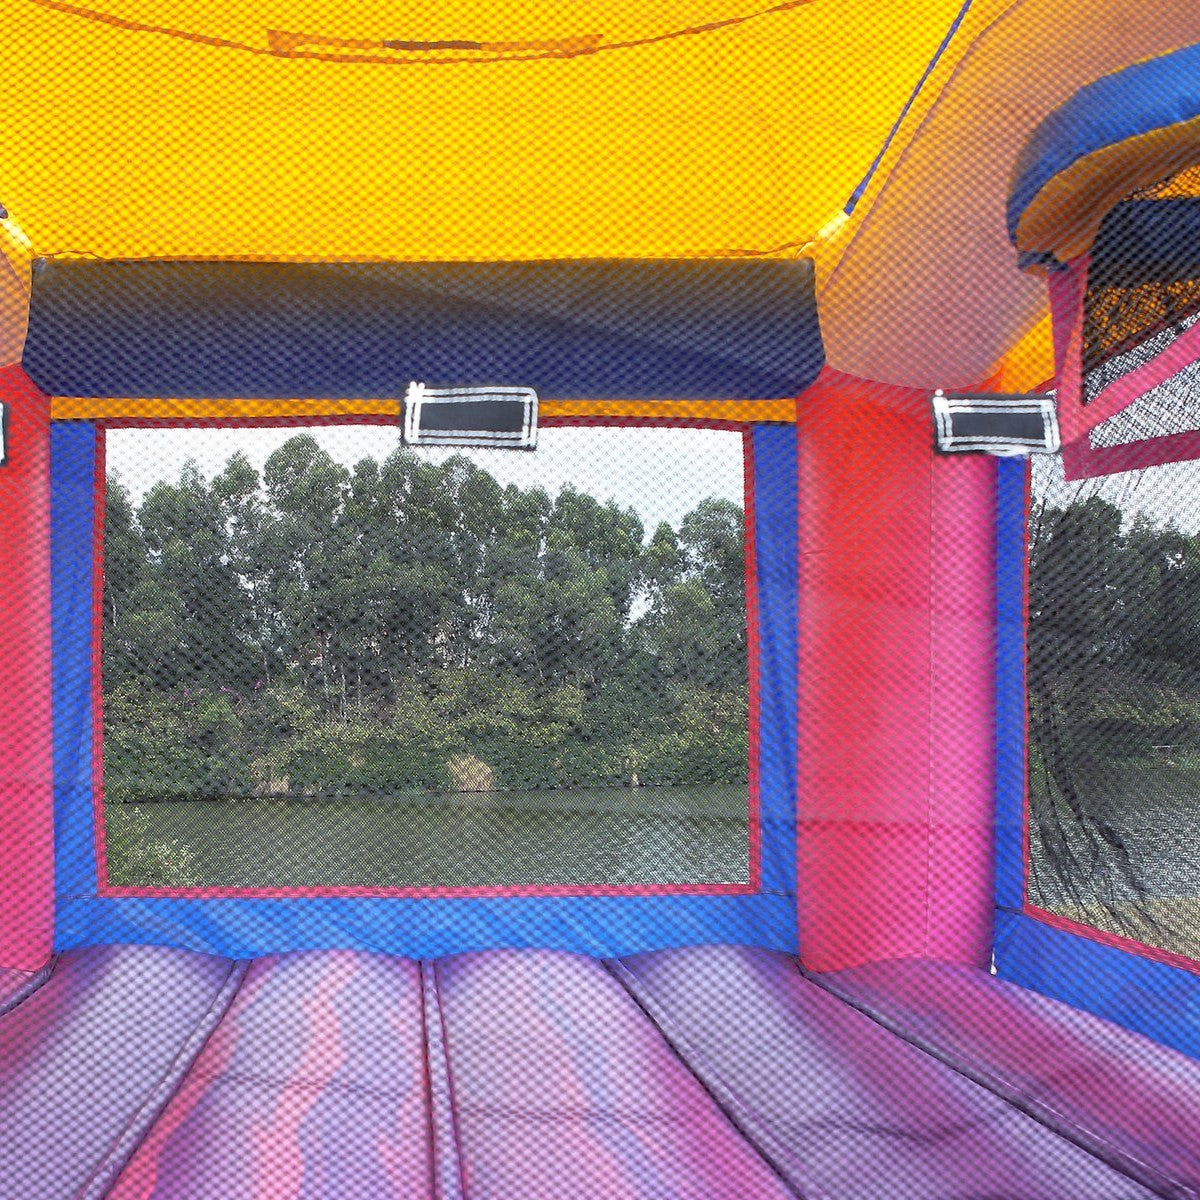 COTTON CANDY 13' X 13' BOUNCE HOUSE